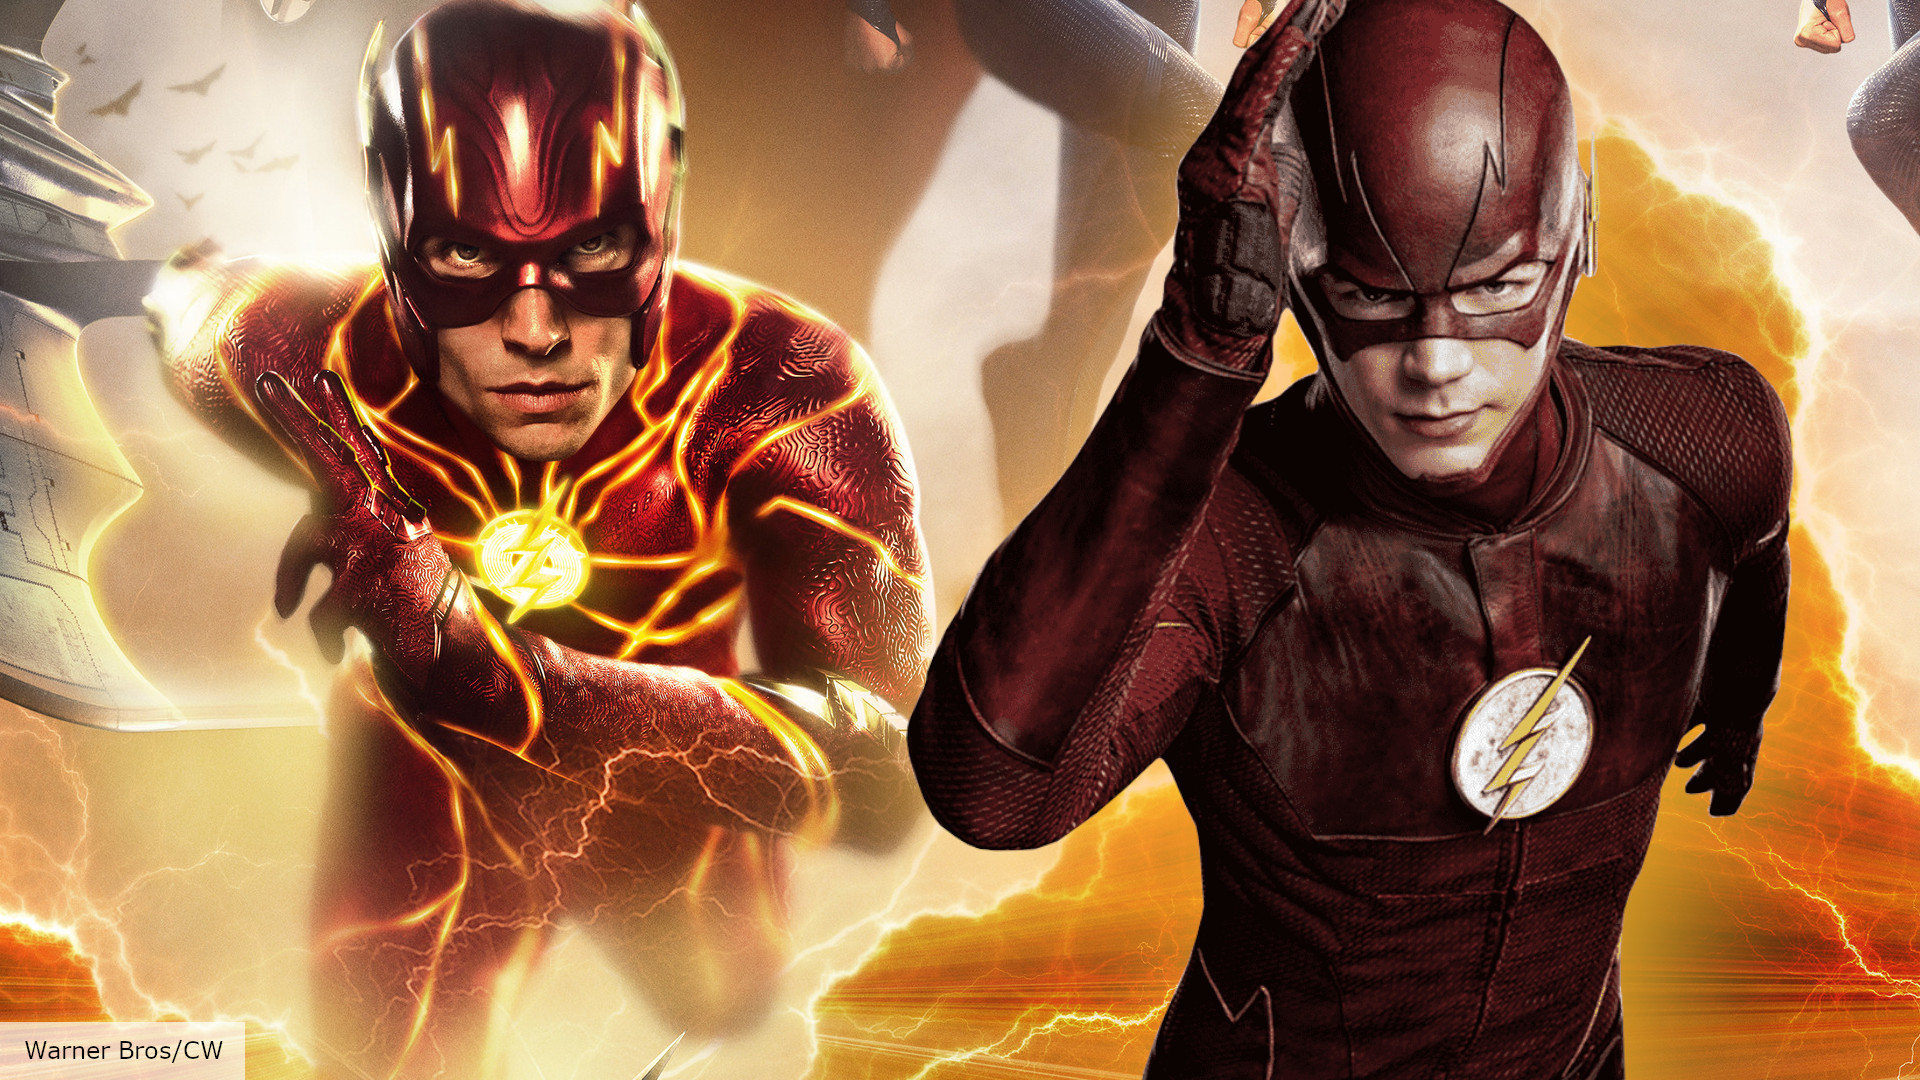 Is Grant Gustin in The Flash movie?